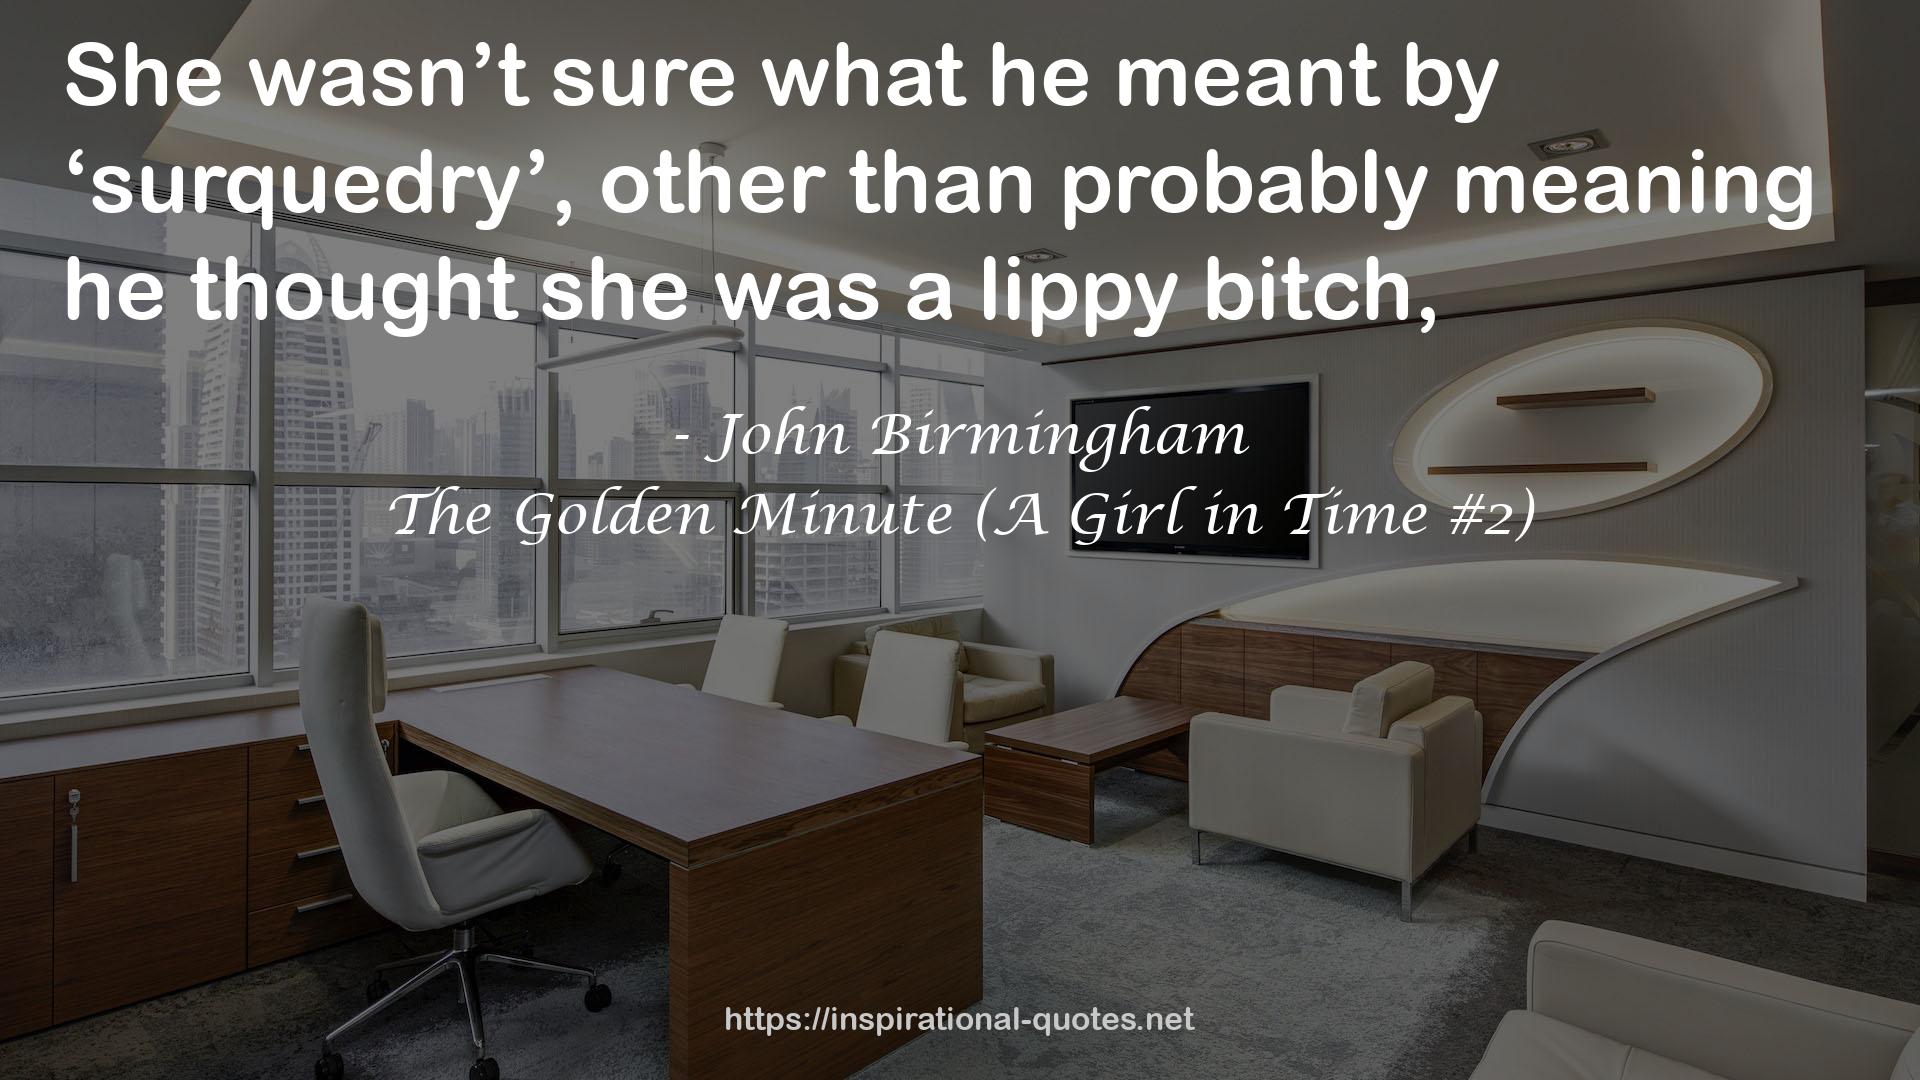 The Golden Minute (A Girl in Time #2) QUOTES